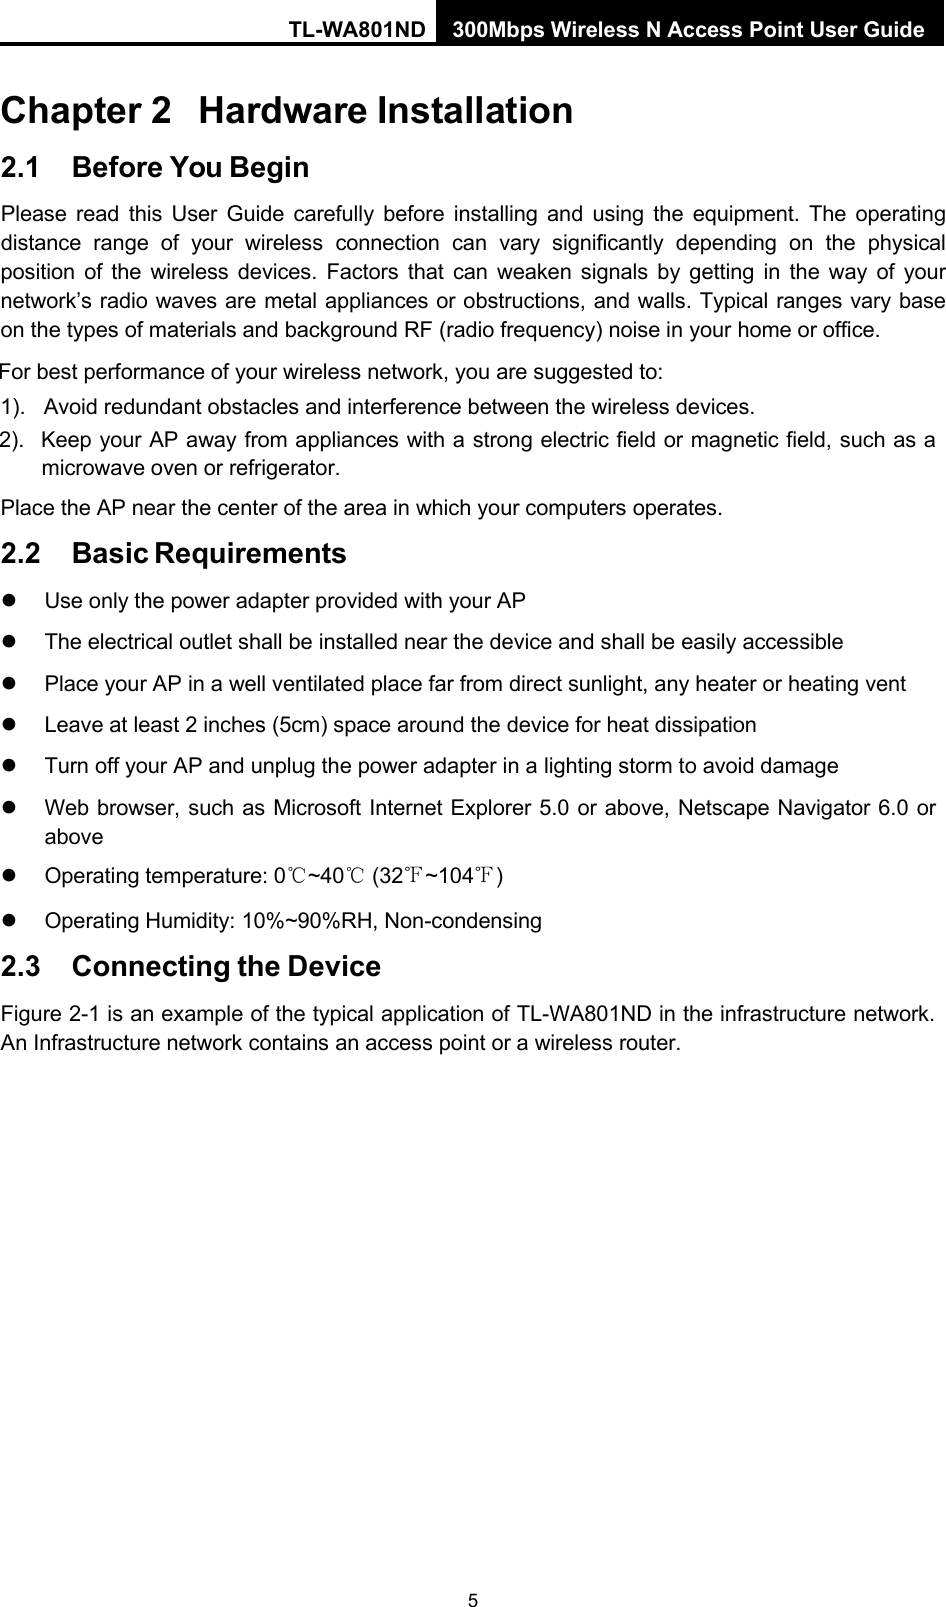 TL-WA801ND 300Mbps Wireless N Access Point User Guide 5    Chapter 2  Hardware Installation 2.1 Before You Begin Please read this User Guide carefully before installing and using the equipment. The operating distance range of your wireless connection can vary significantly depending on the physical position of the wireless devices. Factors that can weaken signals by getting in the way of your network’s radio waves are metal appliances or obstructions, and walls. Typical ranges vary base on the types of materials and background RF (radio frequency) noise in your home or office. For best performance of your wireless network, you are suggested to: 1).   Avoid redundant obstacles and interference between the wireless devices. 2).   Keep your AP away from appliances with a strong electric field or magnetic field, such as a microwave oven or refrigerator. Place the AP near the center of the area in which your computers operates. 2.2 Basic Requirements  Use only the power adapter provided with your AP  The electrical outlet shall be installed near the device and shall be easily accessible  Place your AP in a well ventilated place far from direct sunlight, any heater or heating vent  Leave at least 2 inches (5cm) space around the device for heat dissipation  Turn off your AP and unplug the power adapter in a lighting storm to avoid damage  Web browser, such as Microsoft Internet Explorer 5.0 or above, Netscape Navigator 6.0 or above  Operating temperature: 0℃~40℃ (32℉~104℉)  Operating Humidity: 10%~90%RH, Non-condensing 2.3 Connecting the Device Figure 2-1 is an example of the typical application of TL-WA801ND in the infrastructure network. An Infrastructure network contains an access point or a wireless router. 